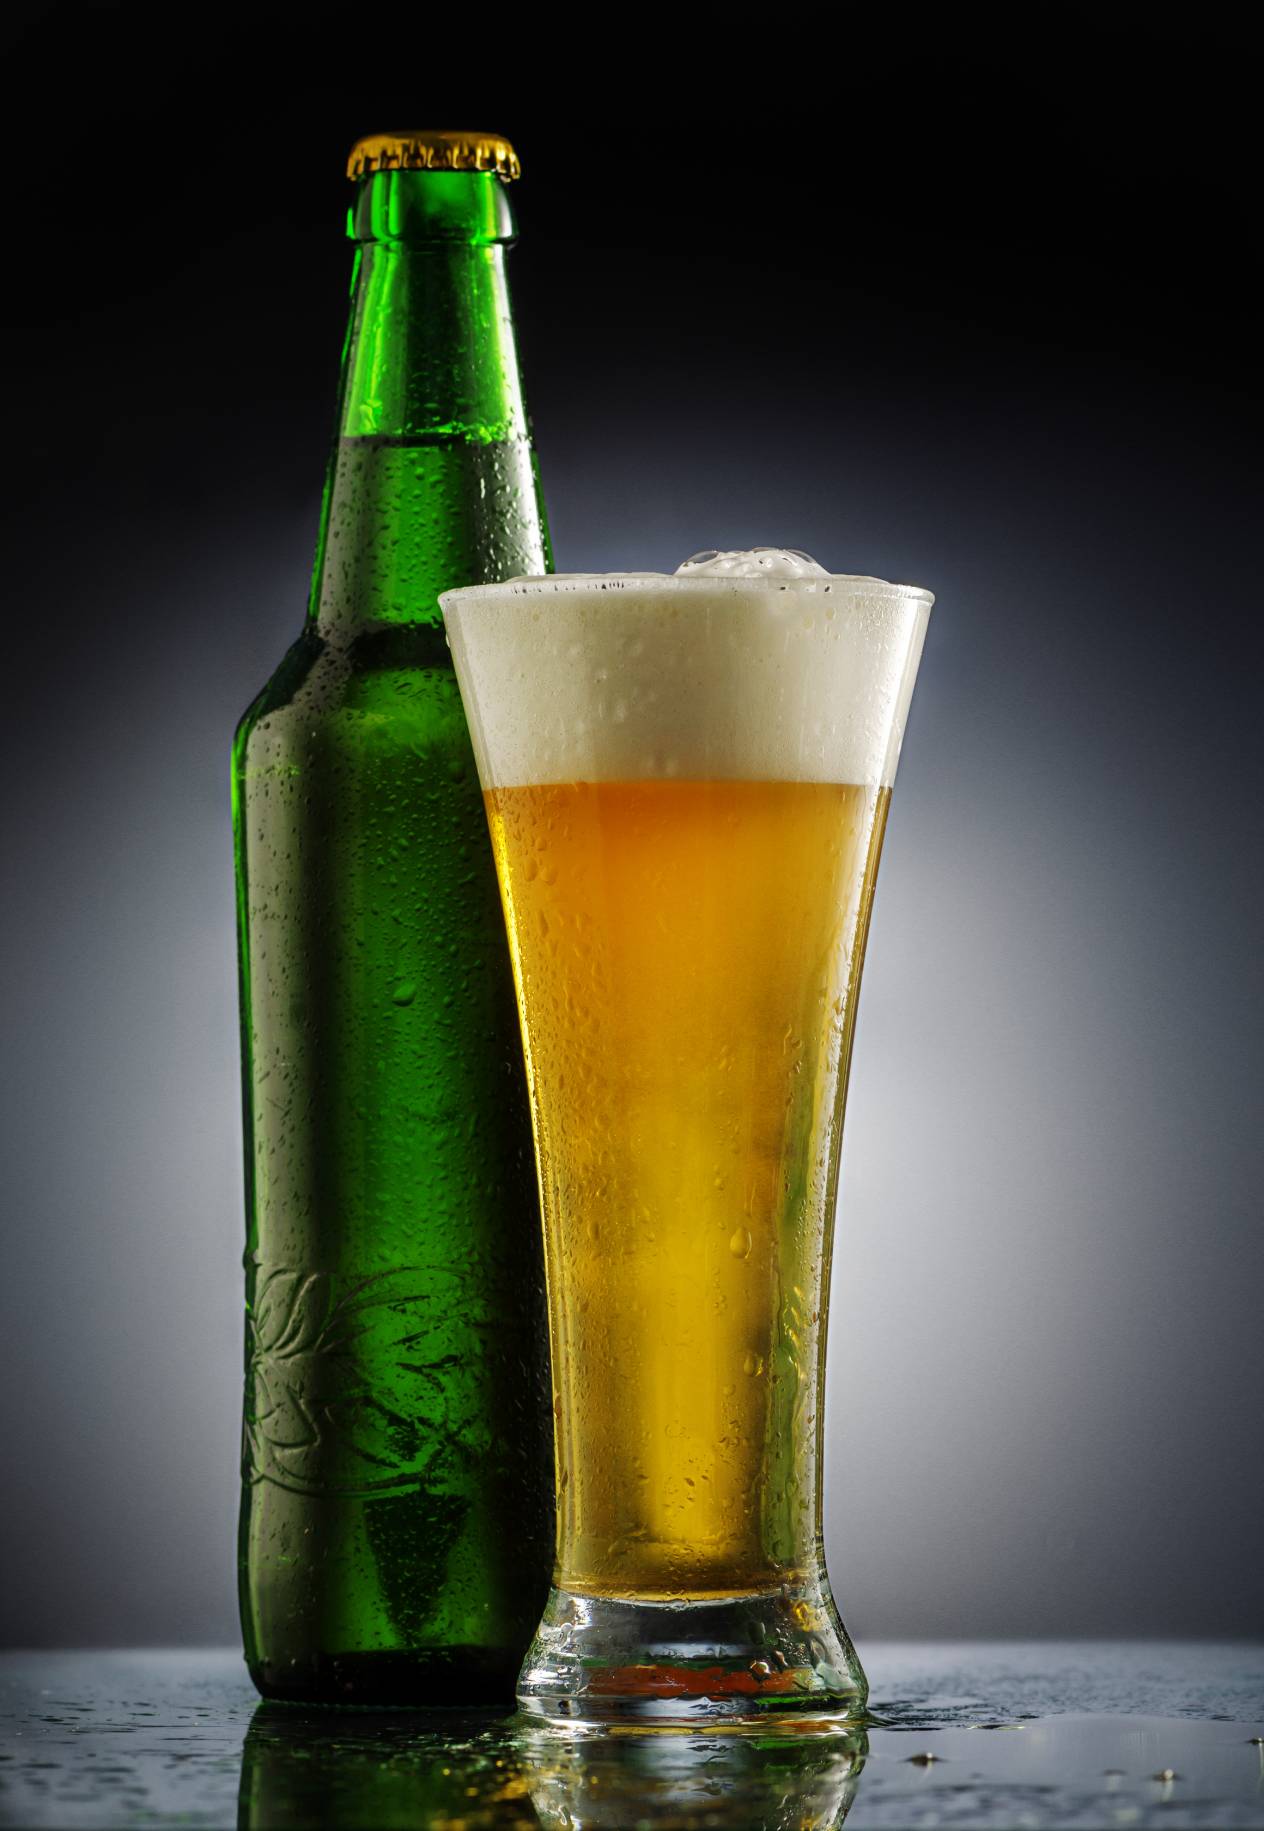 A bottle of beer and a glass of beer.